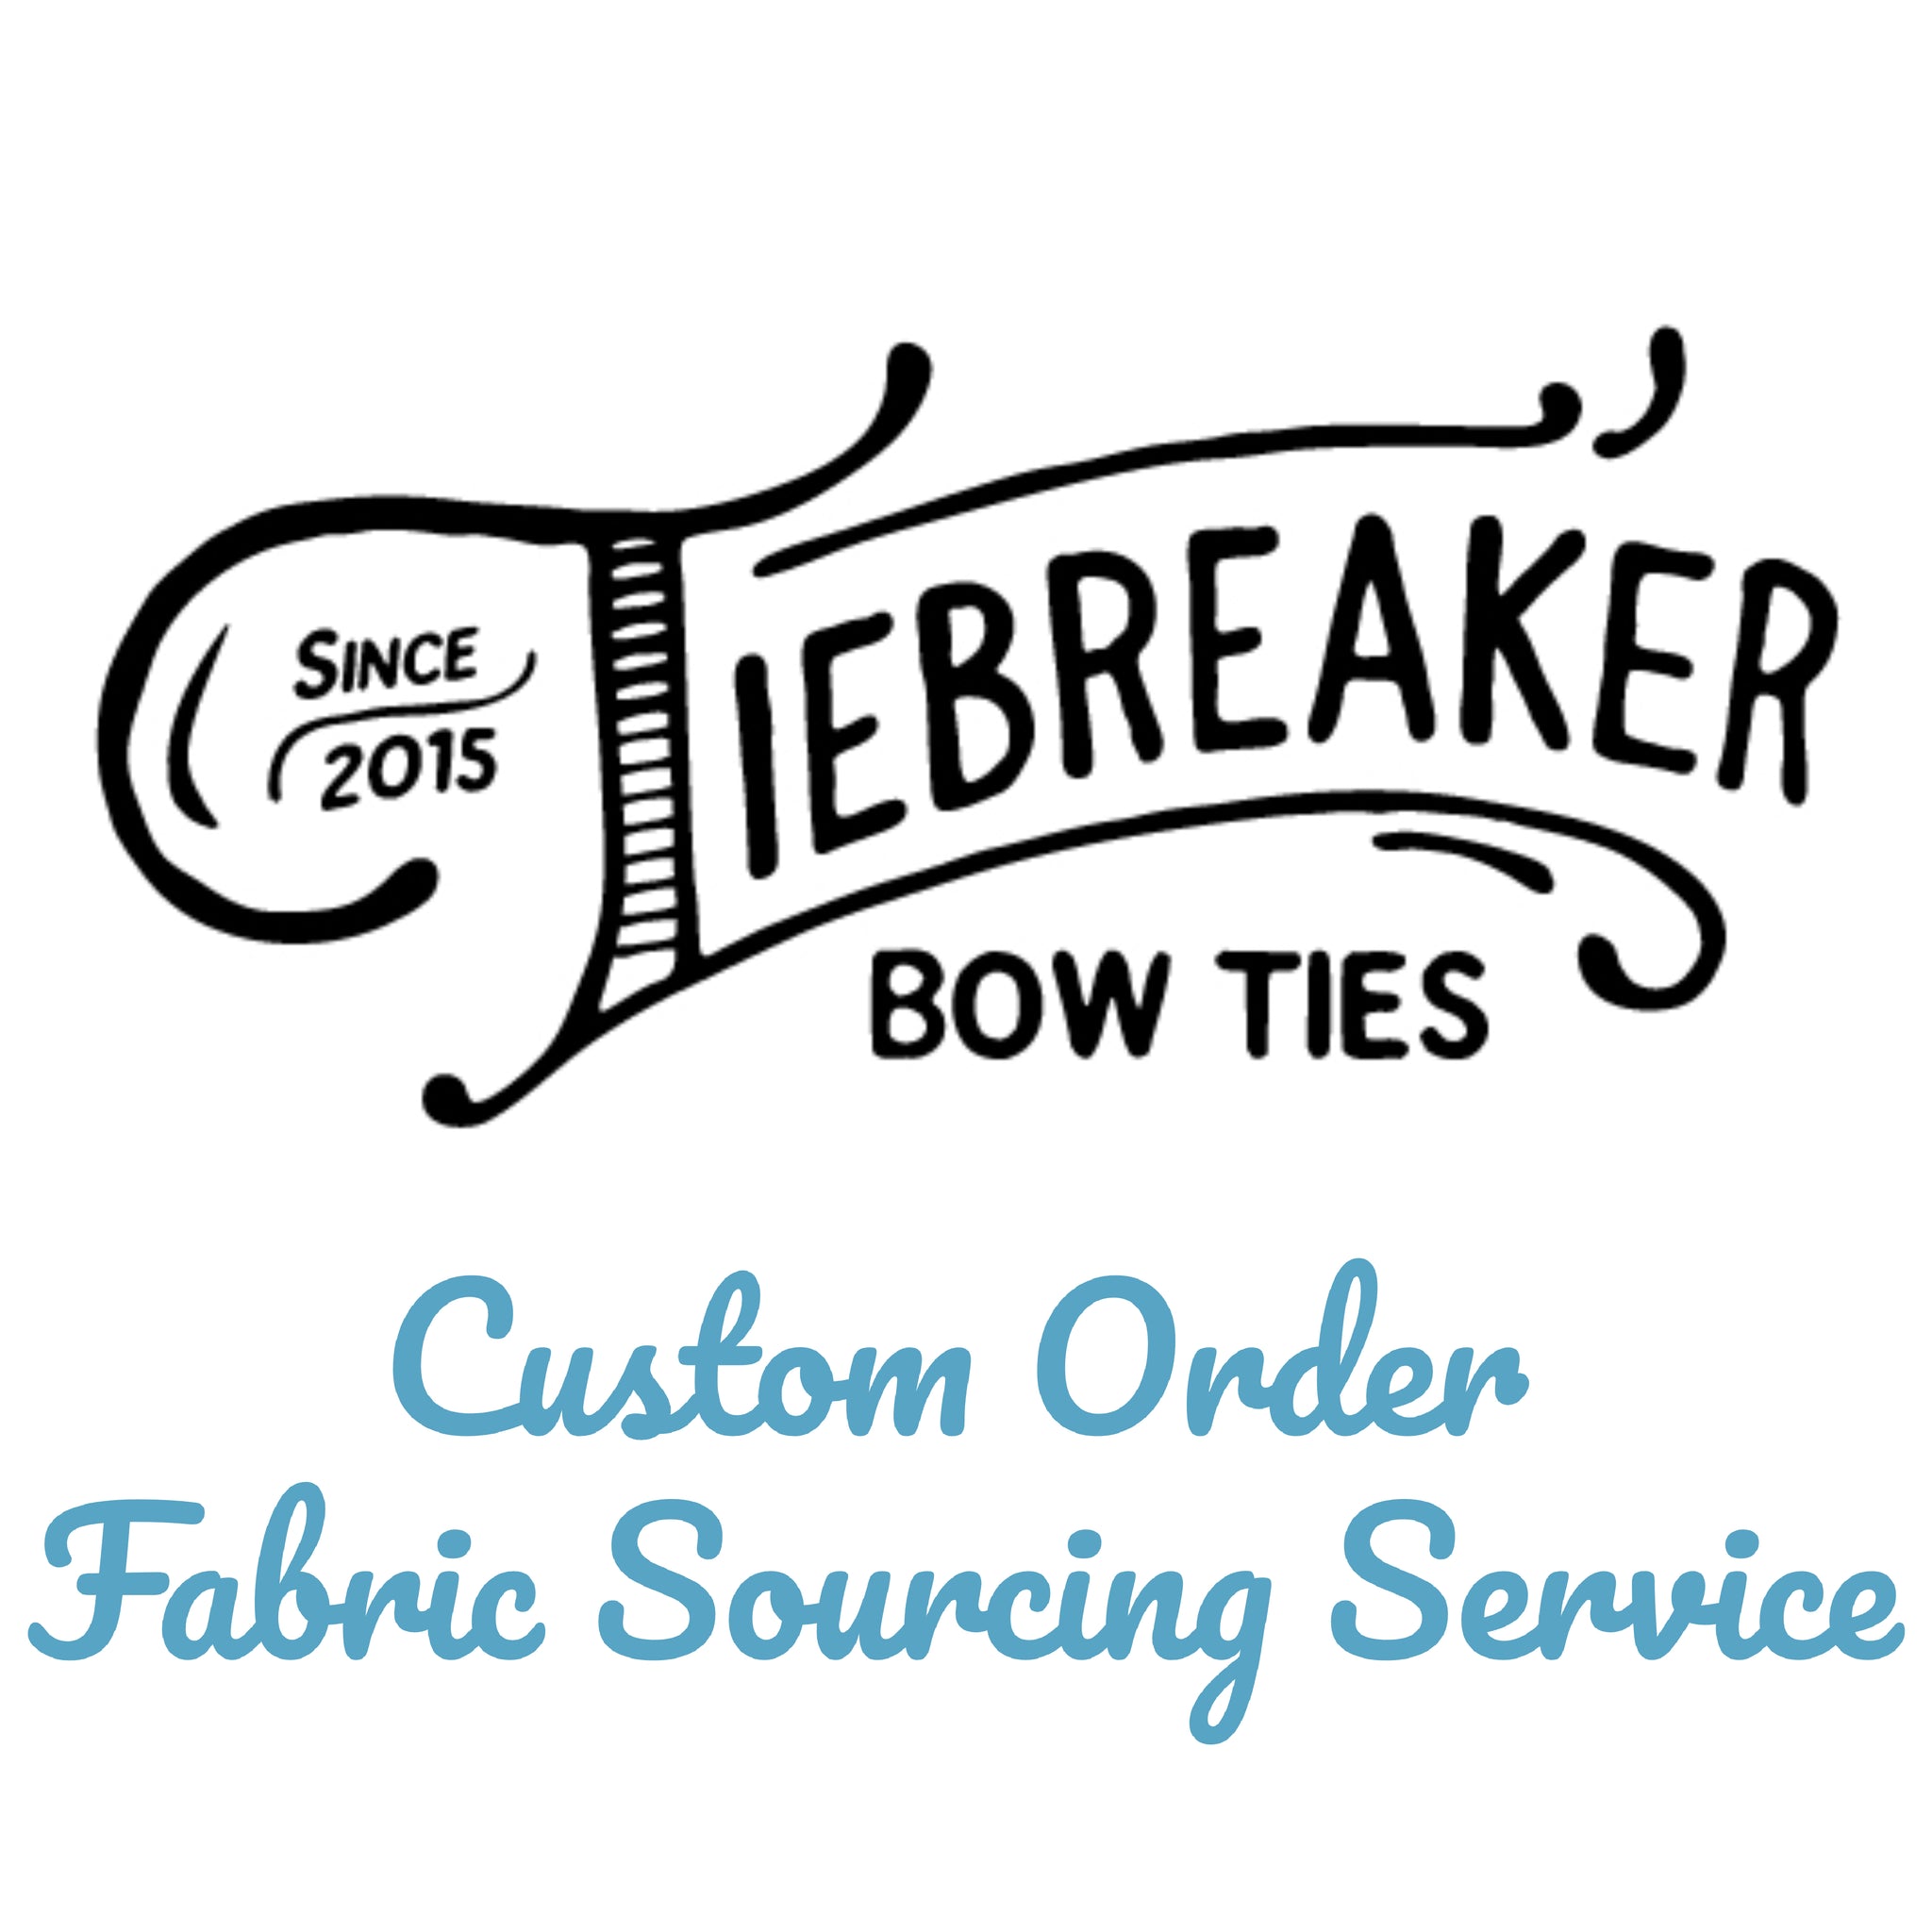 Custom Order Fabric Sourcing Service - Non-Refundable